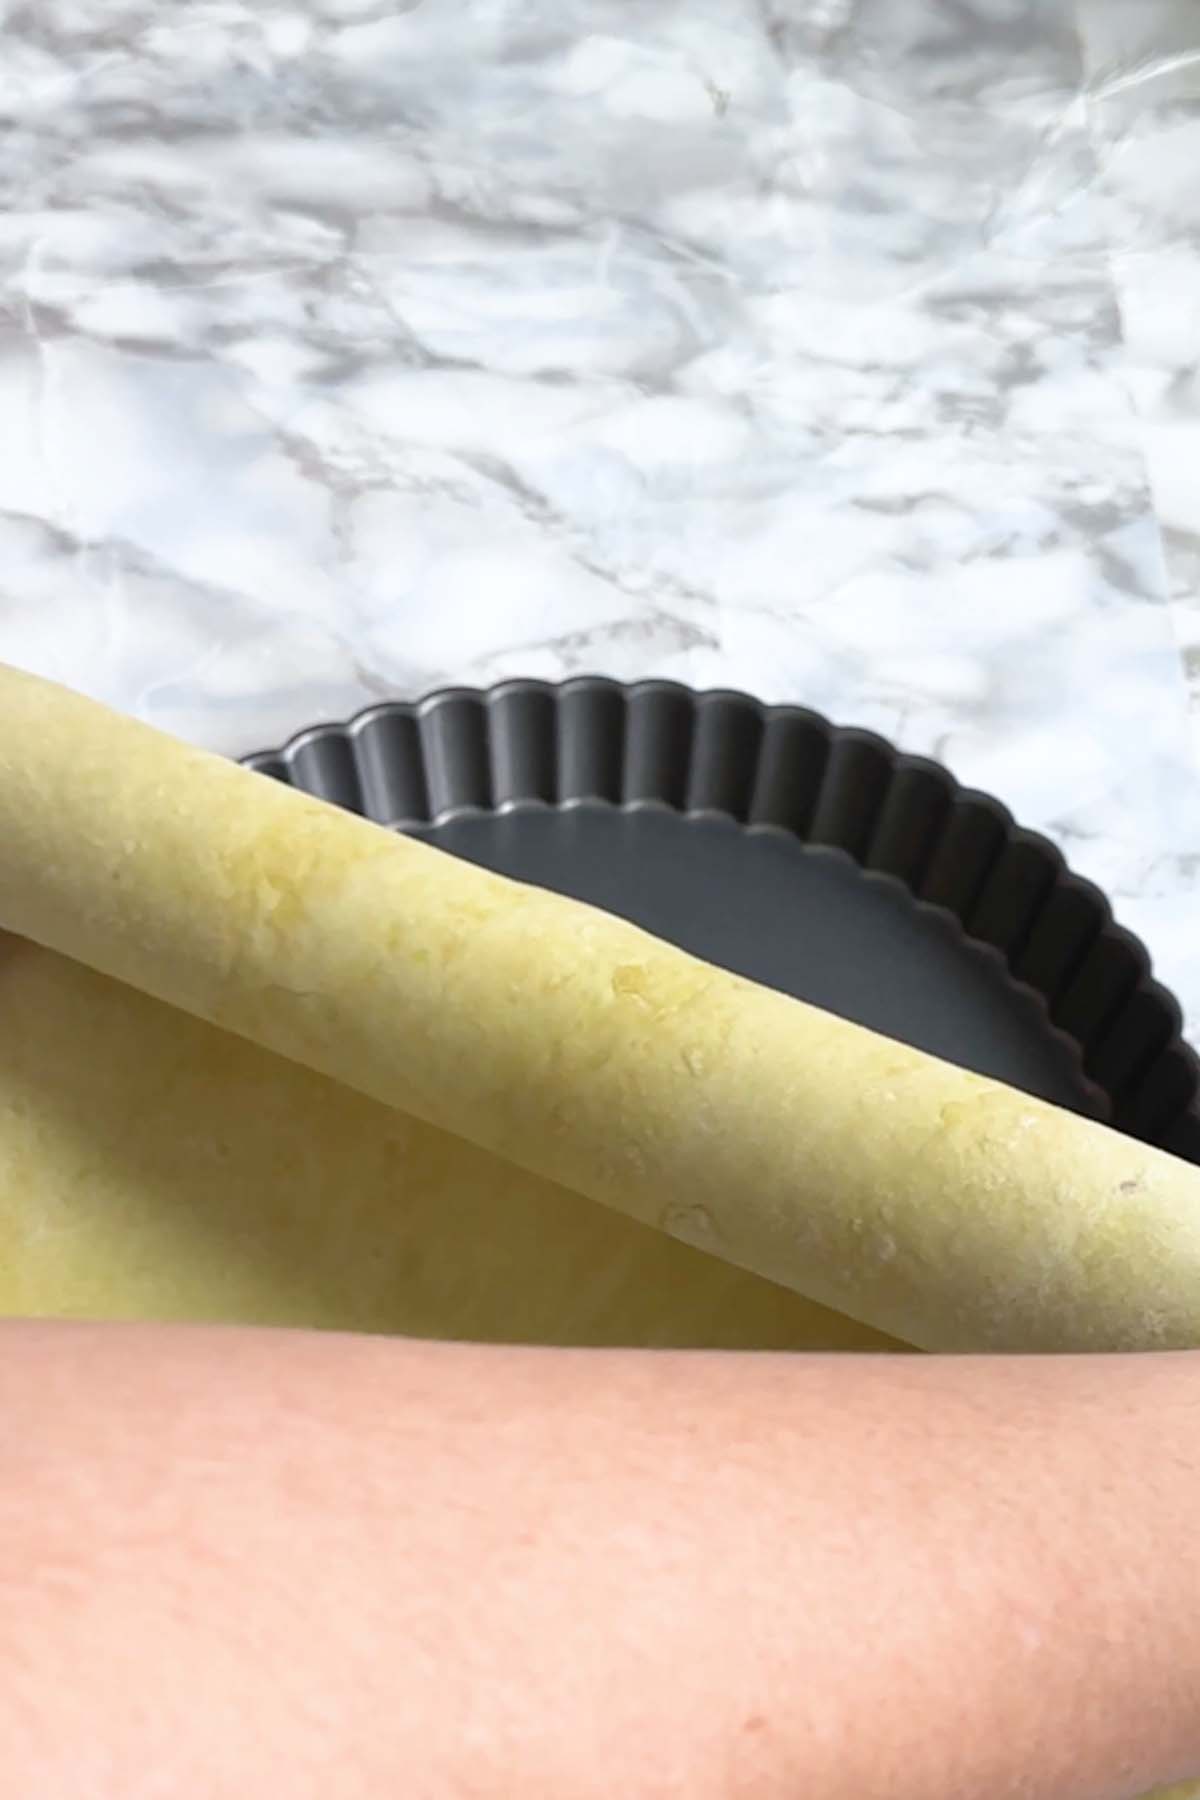 Pie dough is rolled off of a rolling pin into a tart pan.